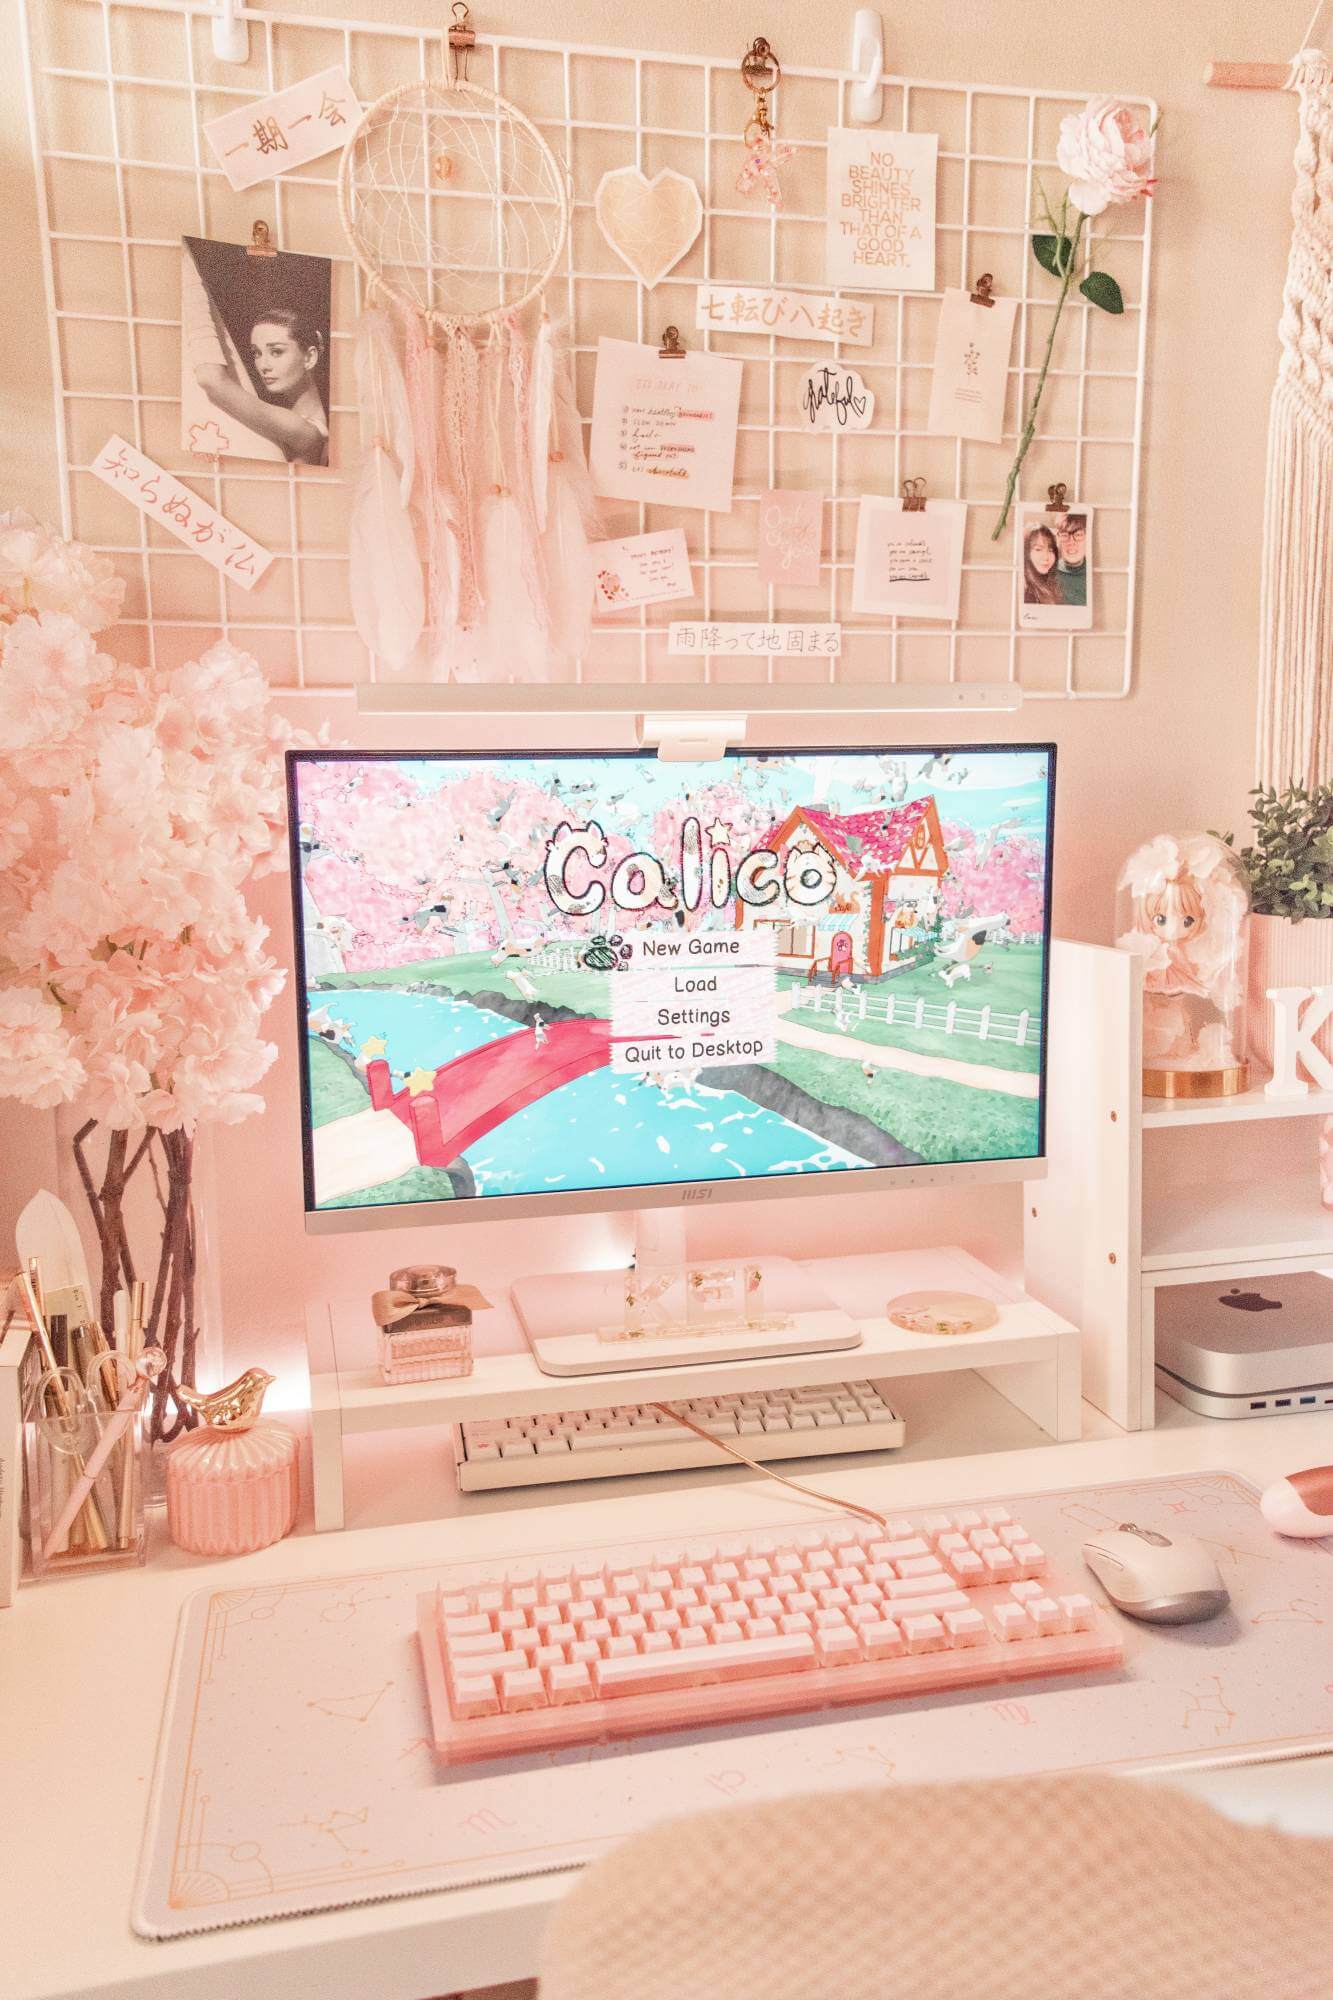 Calico is described as a day-in-the-life community sim game. Your objective is to rebuild the town's very own cat café and fill it with cute pets